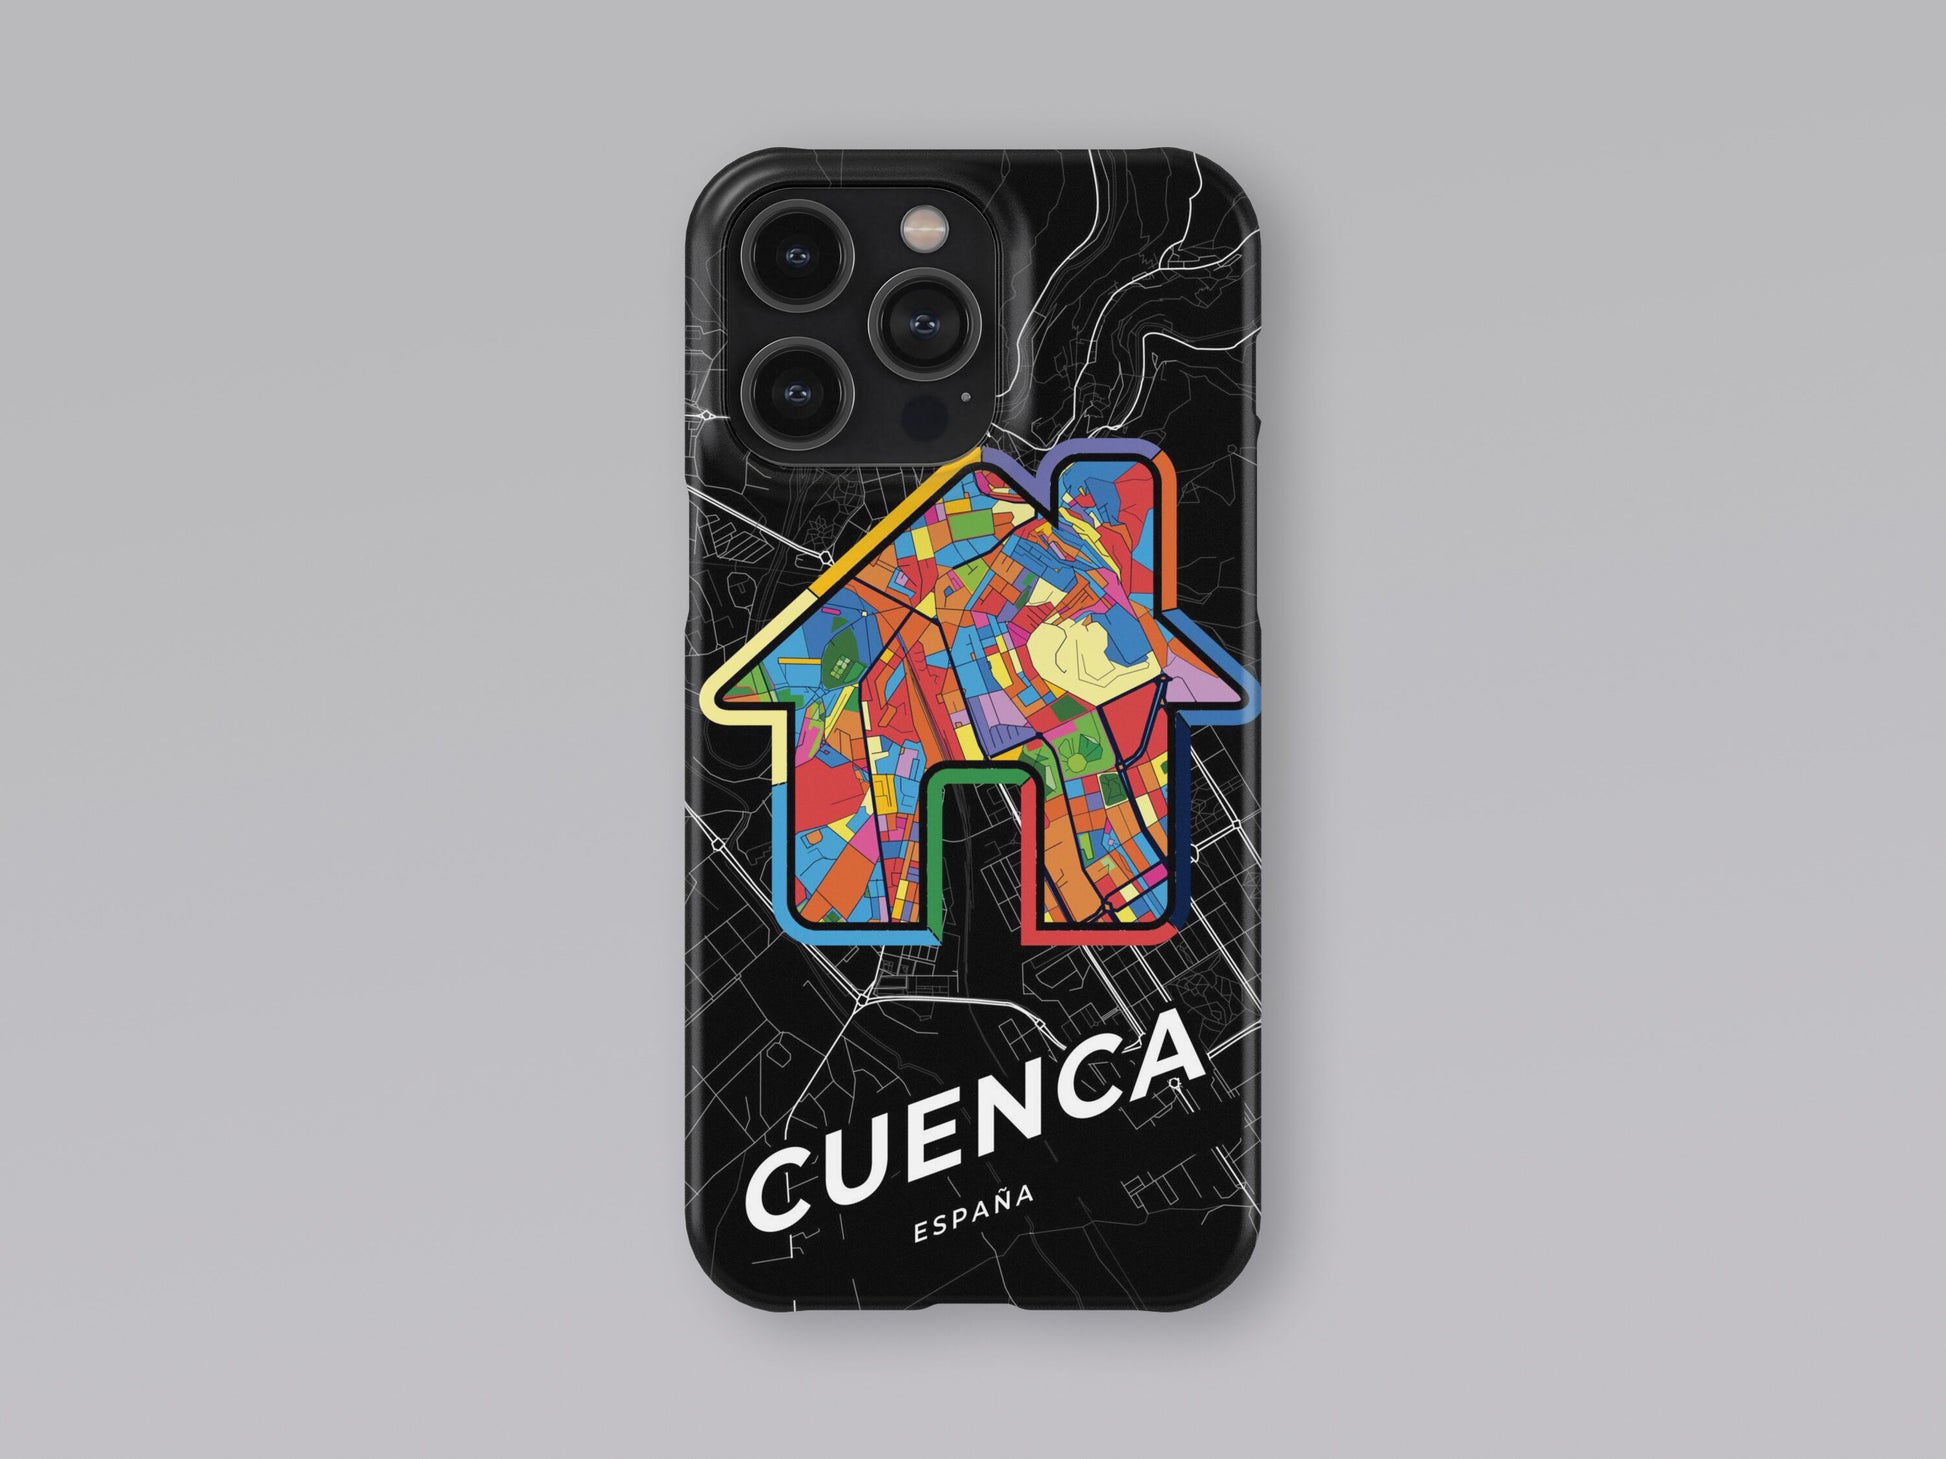 Cuenca Spain slim phone case with colorful icon. Birthday, wedding or housewarming gift. Couple match cases. 3